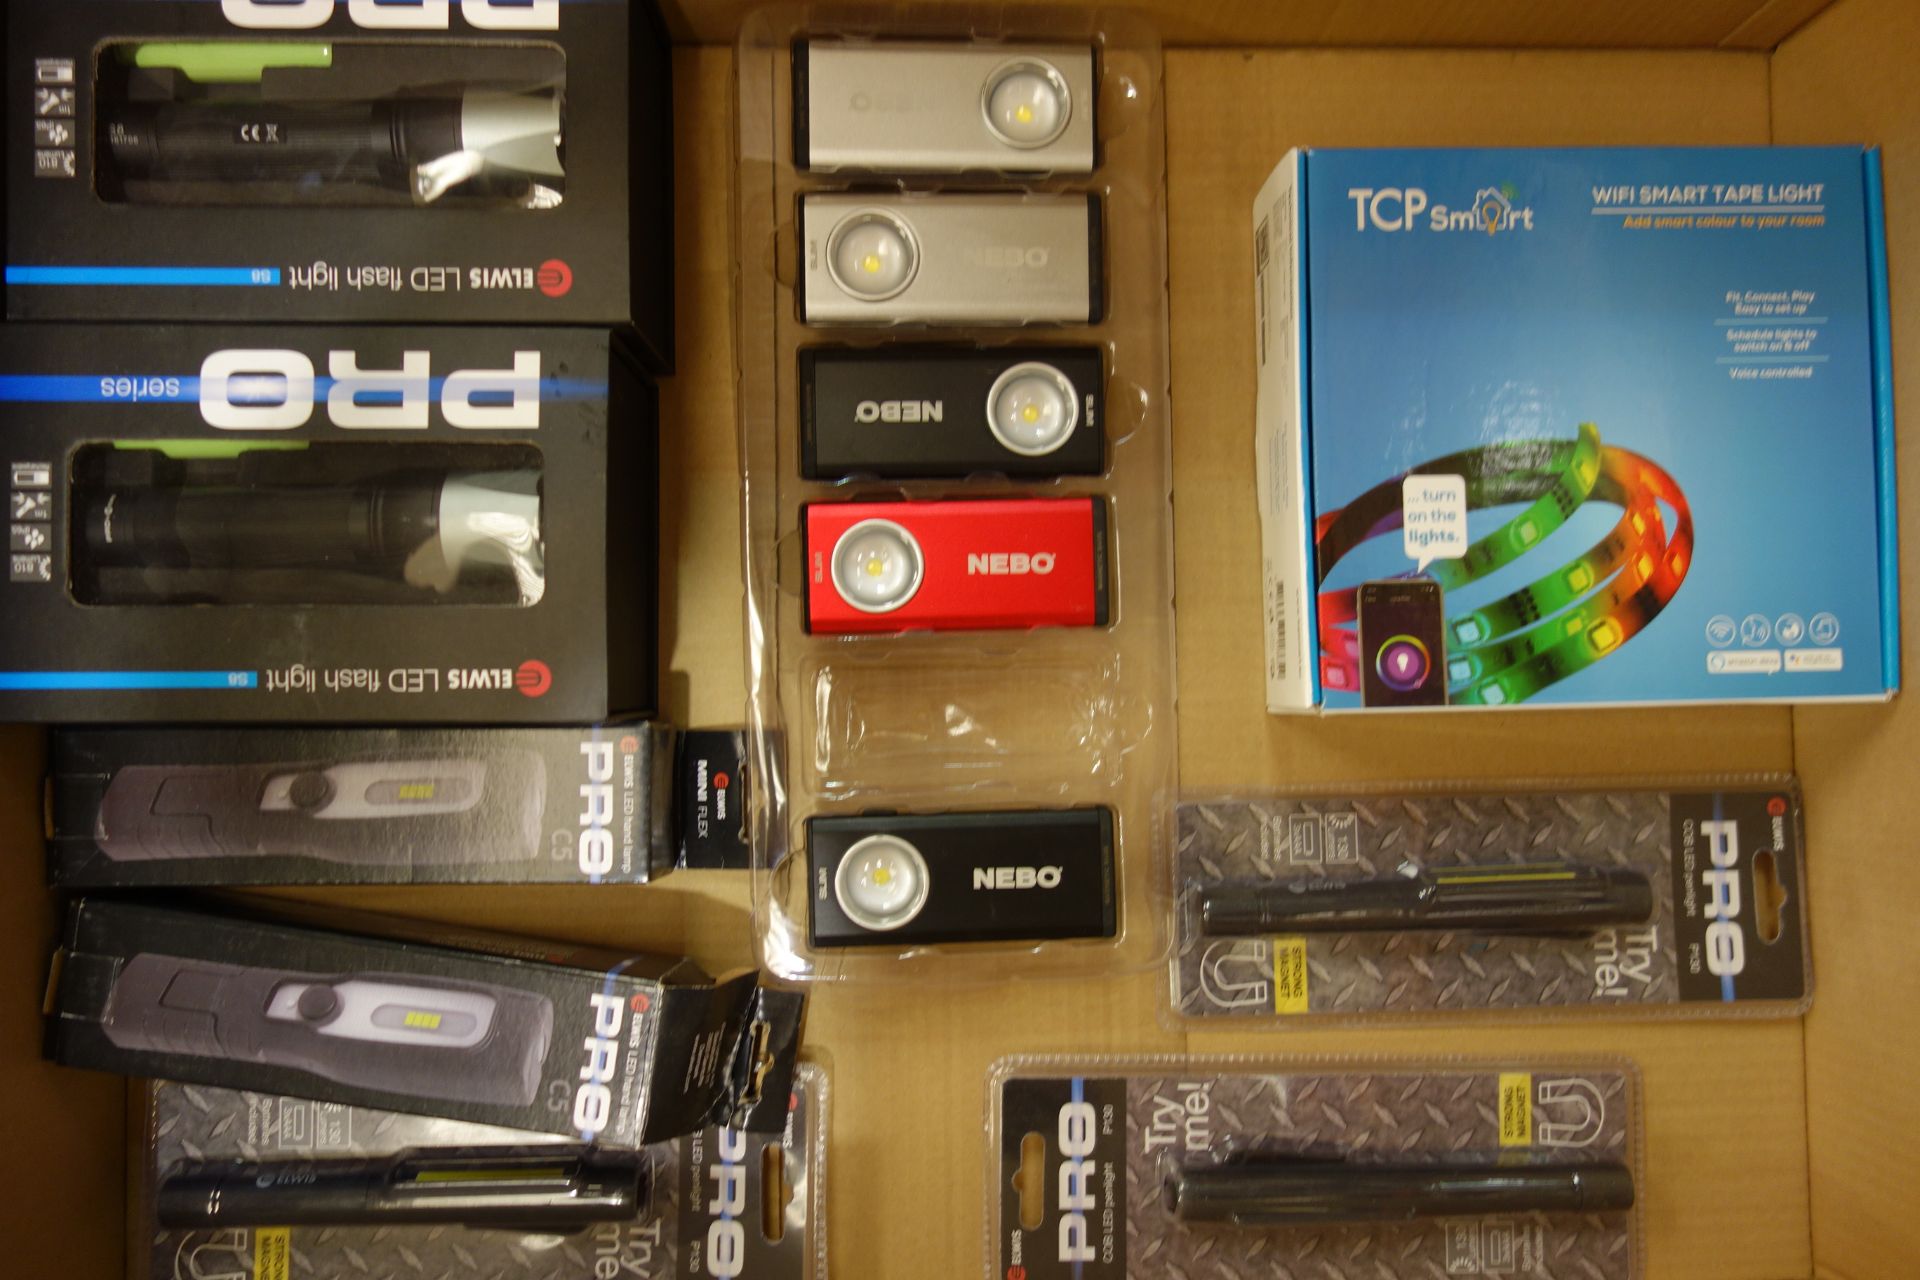 1 X Box Of Mixed Torches All LED, 9 Of Which USB Rechargable Also Wi-Fi Smart Tape Light, Just